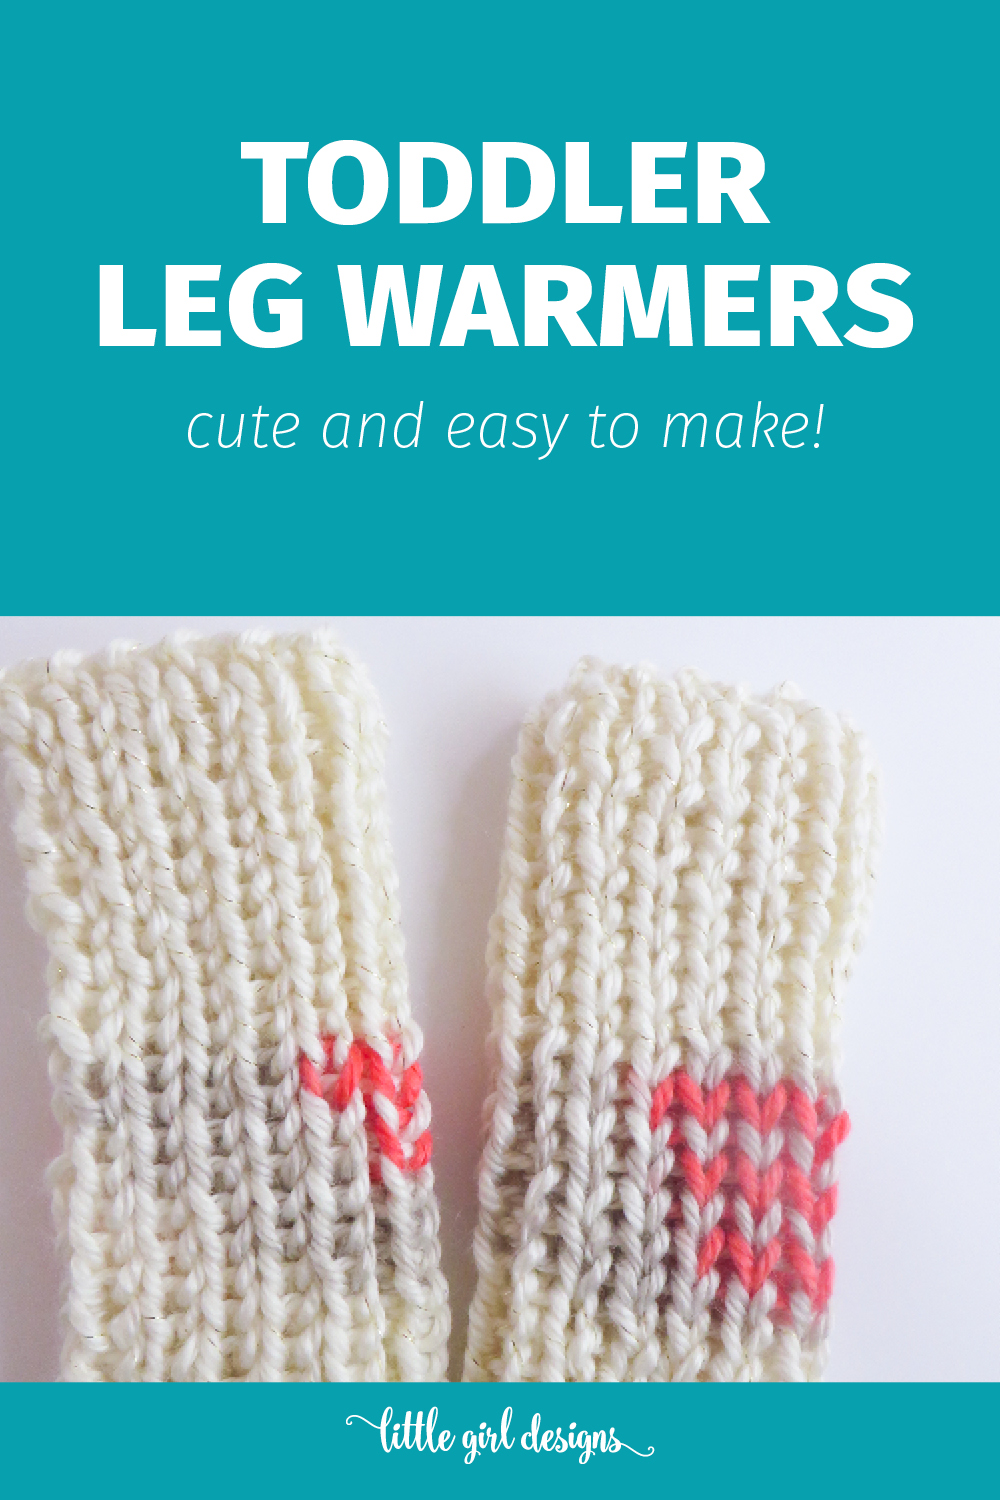 These sweet toddler leg warmers are really simple to knit up and also make a great gift! You can make a smaller set for a new baby. Too cute!